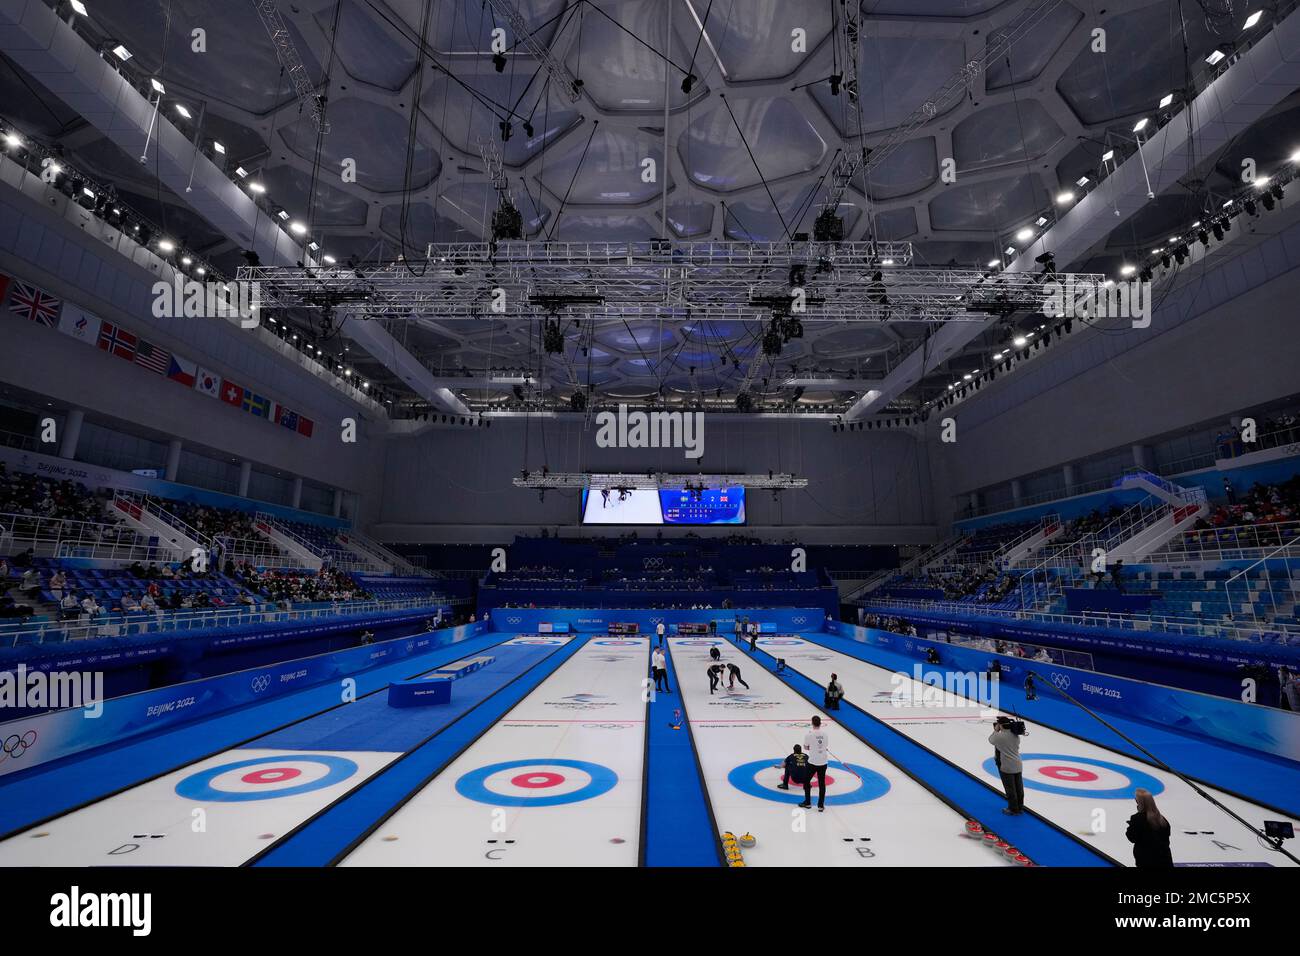 Sweden and Britain compete in the mens curling final match at the Beijing Winter Olympics Saturday, Feb